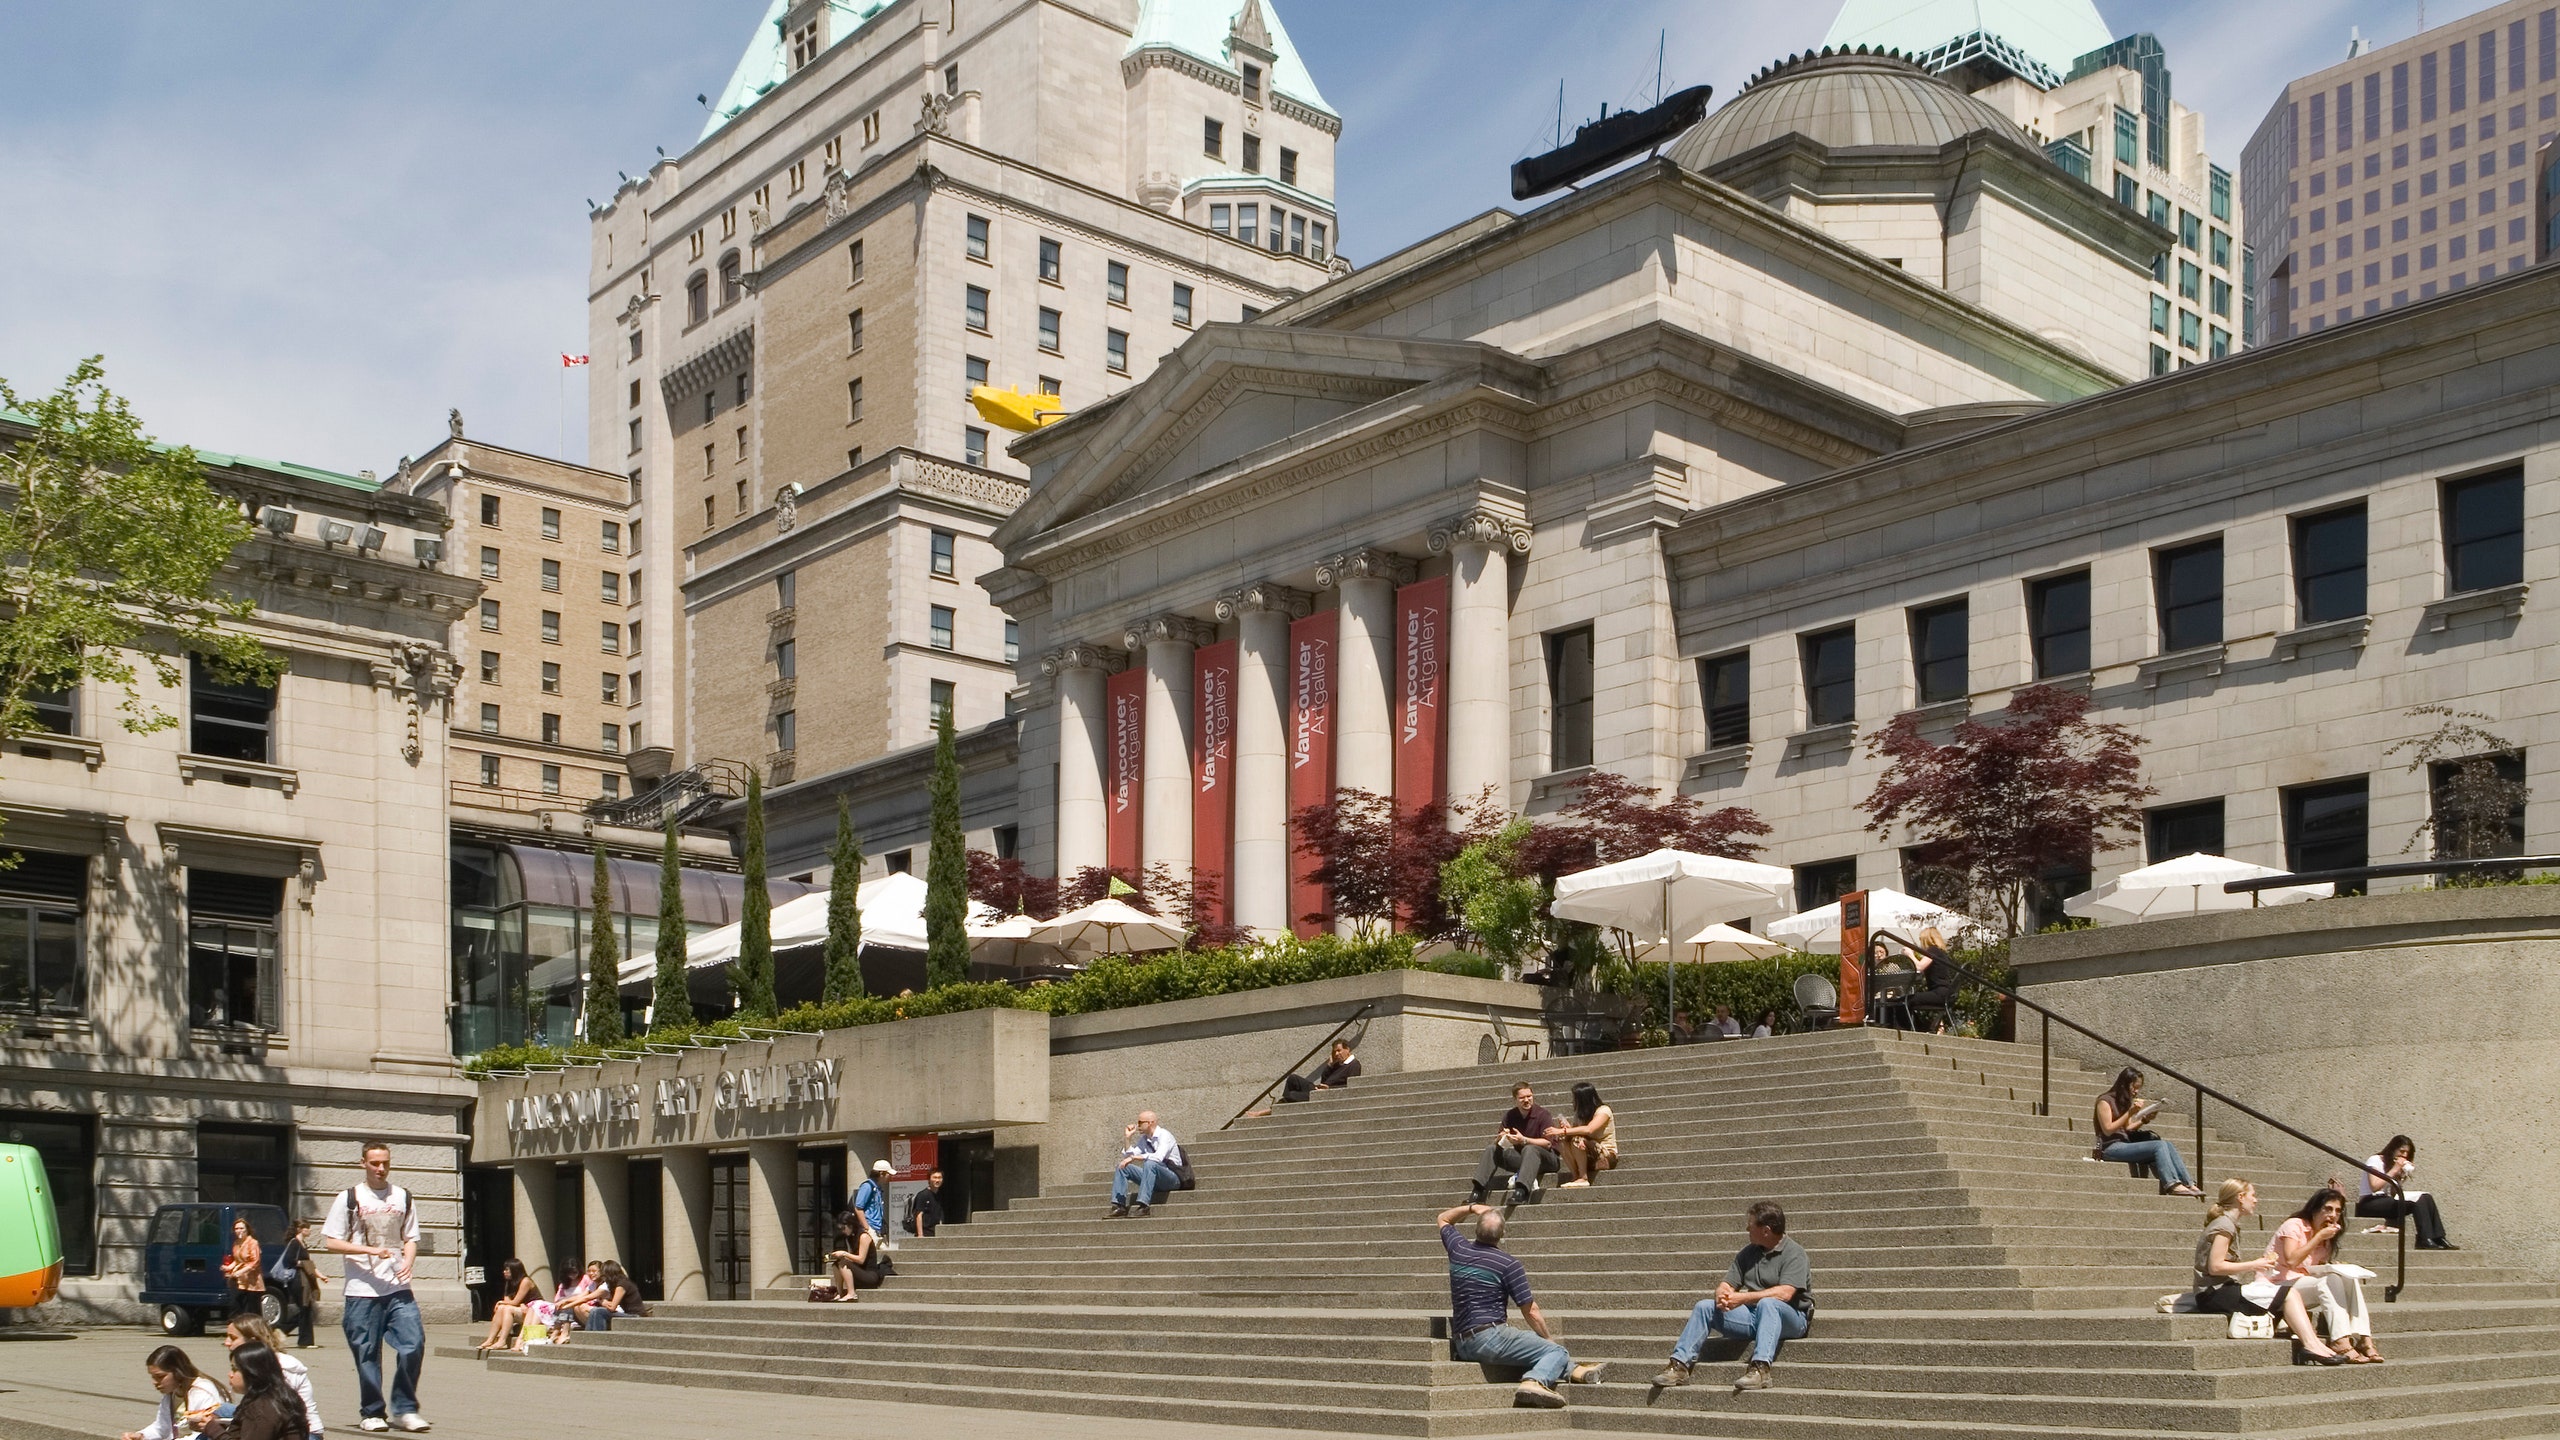 Vancouver Art Gallery Financial District British